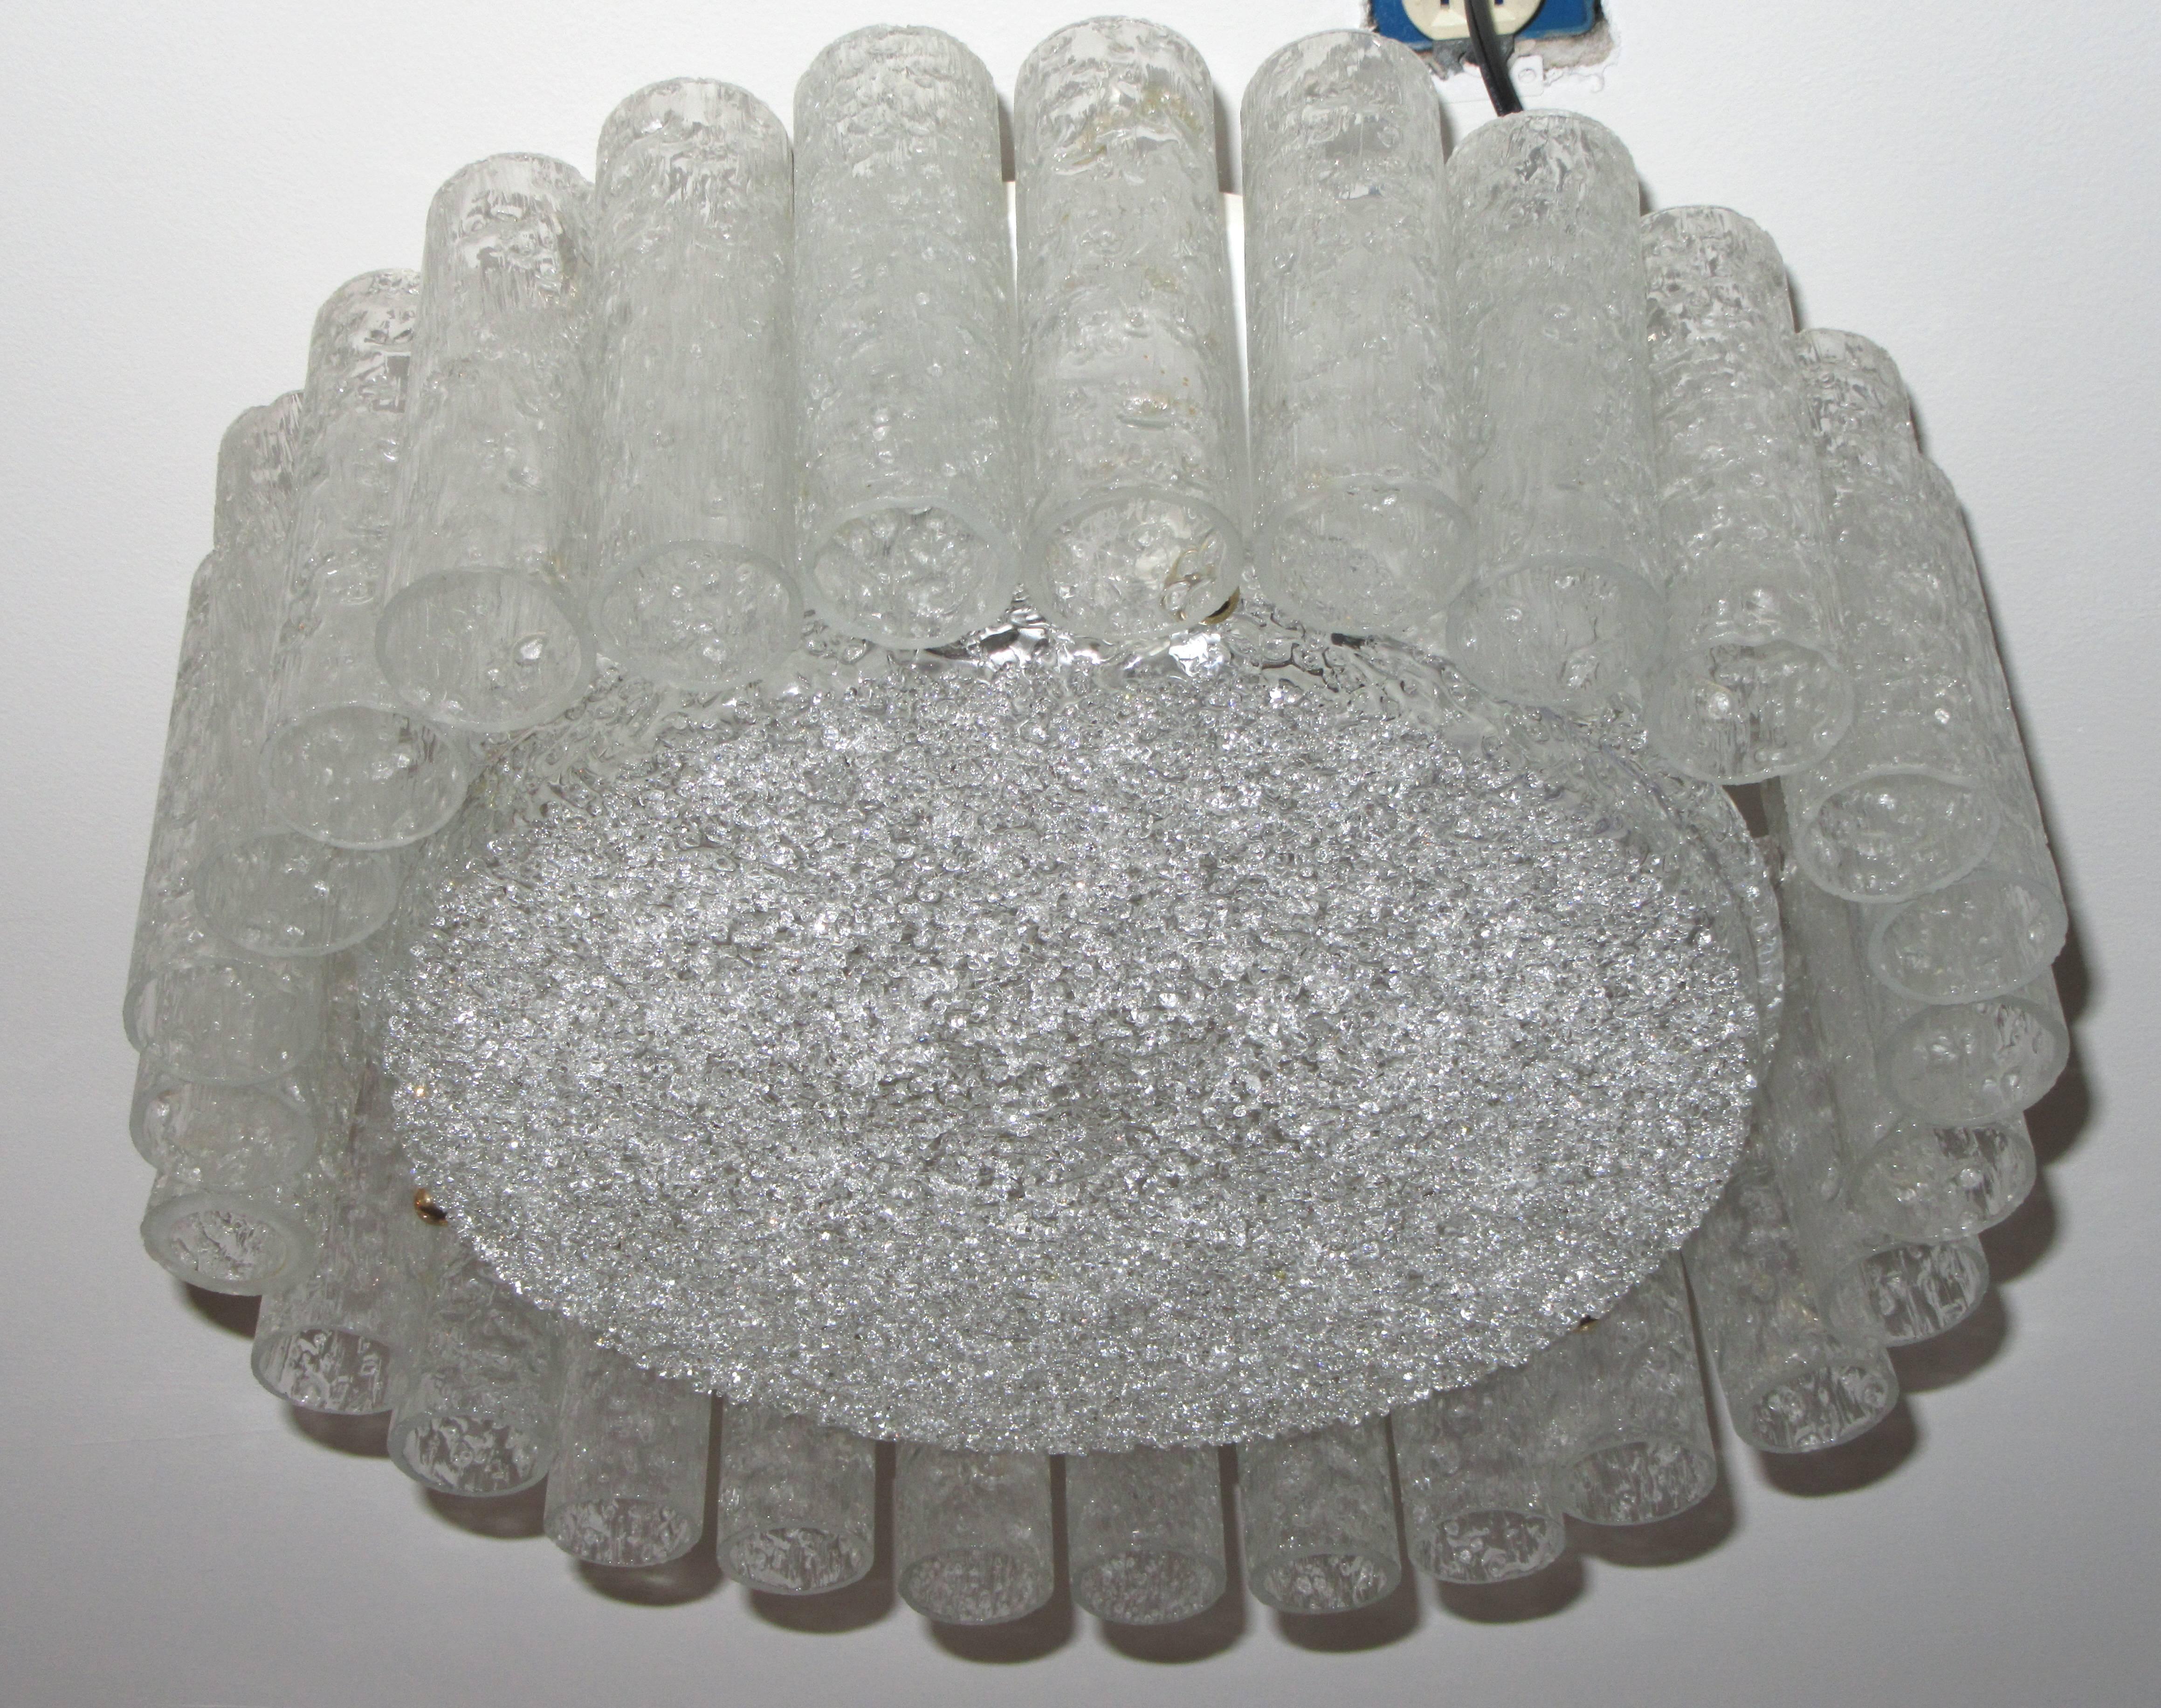 A Mid-Century ceiling light designed in the 1960s and manufactured by Doria Leuchten of West Germany. It features a white lacquered metal base with six sockets candelabra bulbs and hooks for 35 ice glass tubes. The middle disc is surrounded by